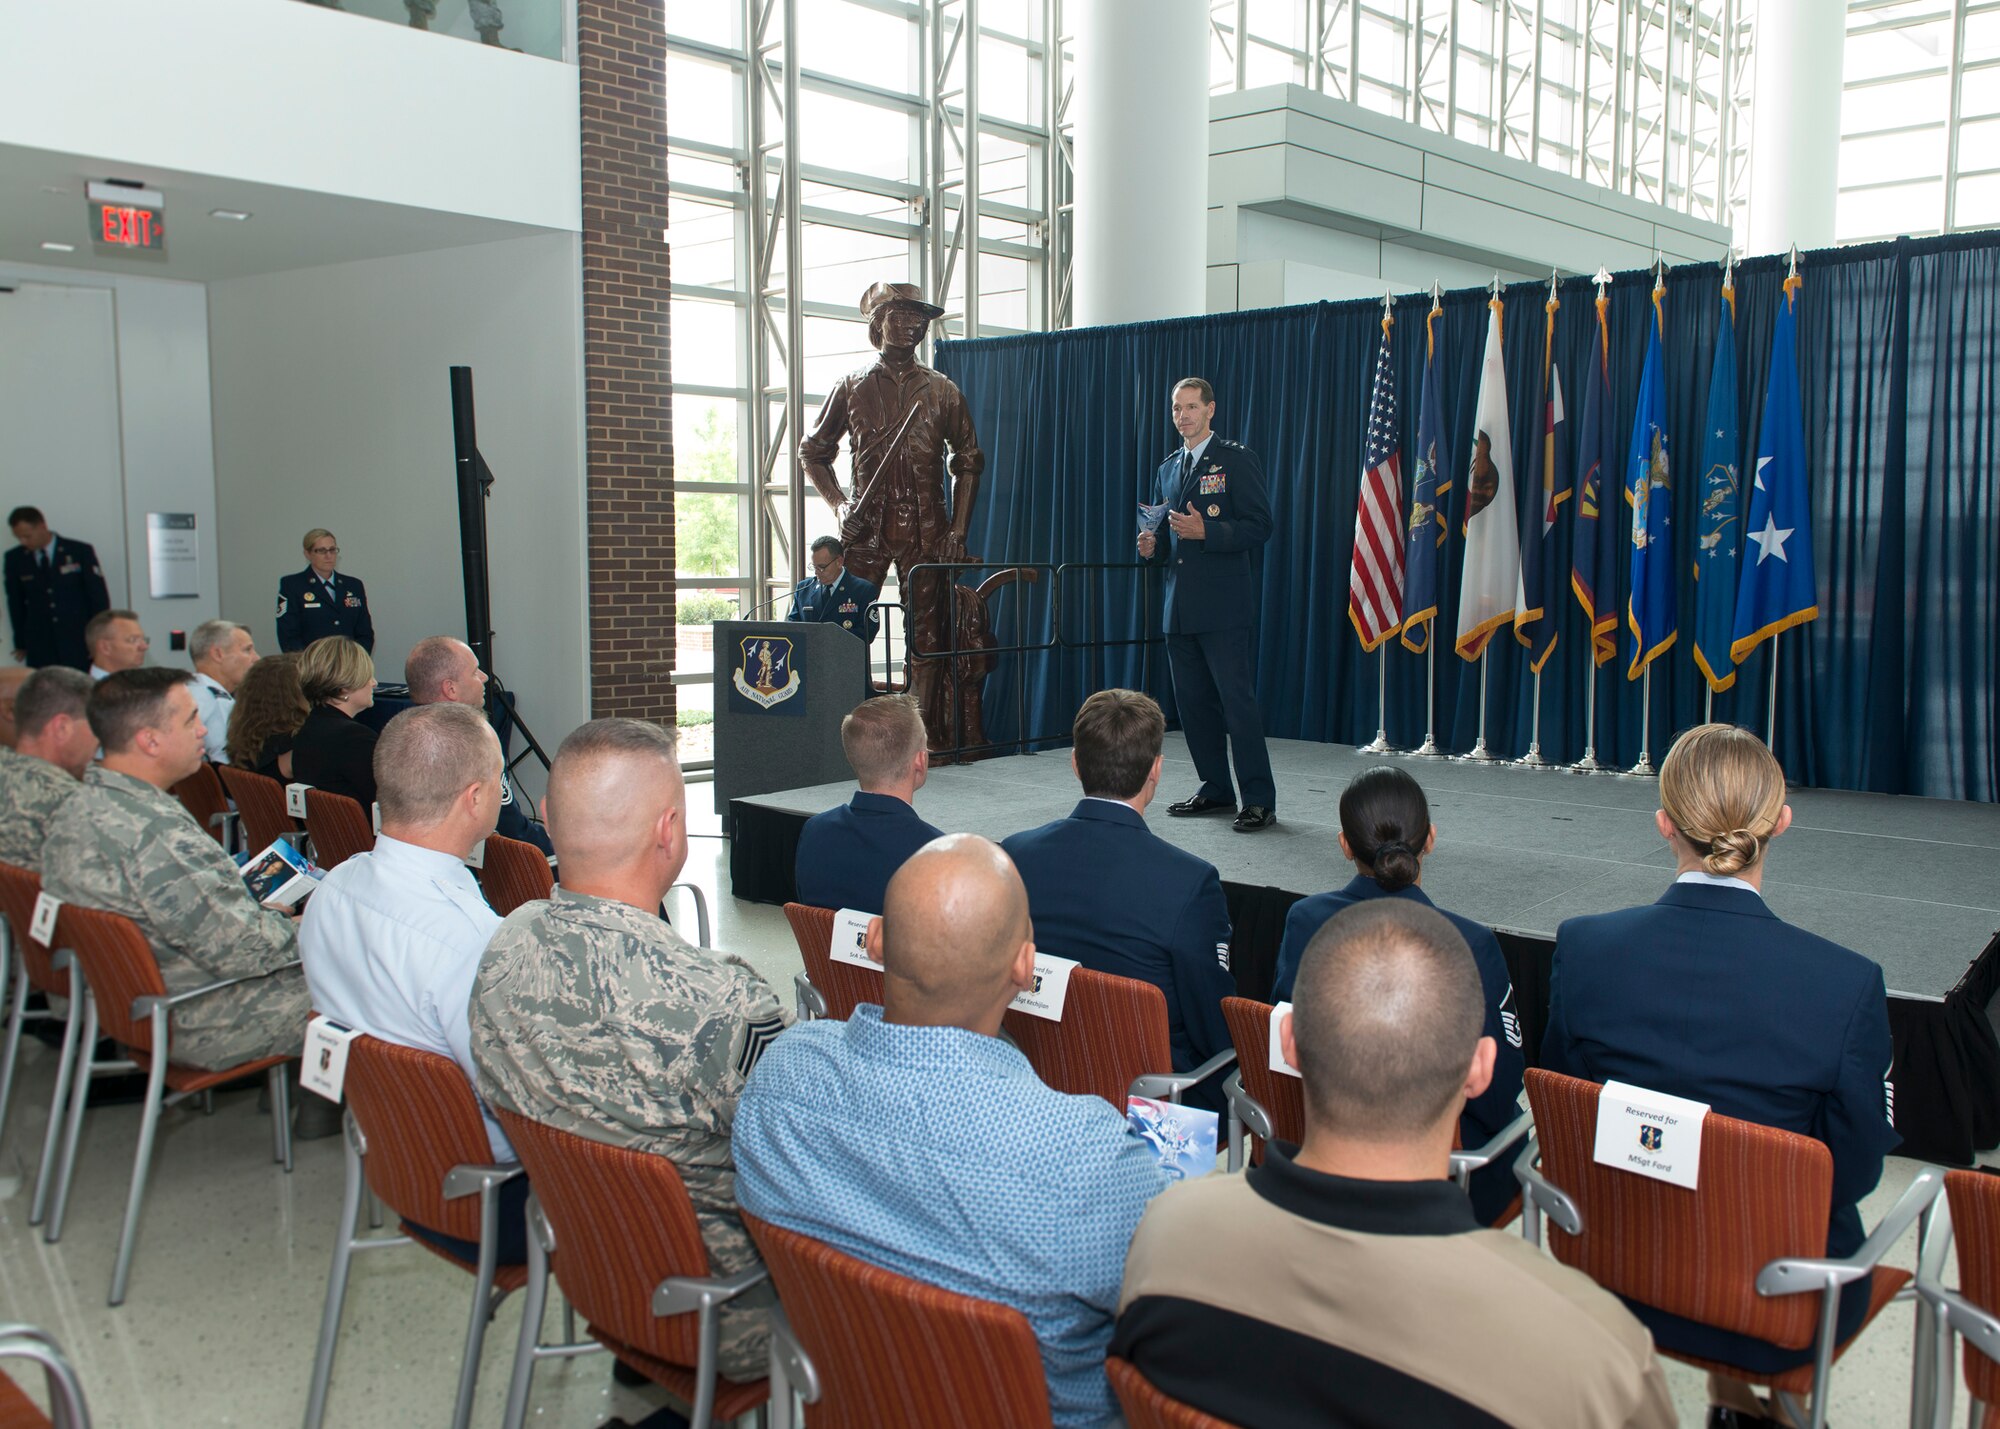 Lieutenant Gen. Stanley E. Clarke III, director of the Air National Guard, addresses attendees during an All Call event Aug. 6, 2015 at Joint Base Andrews, Maryland. The purpose of the All Call is to recognize the ANG’s Outstanding Airmen of the Year and signifies the end to Focus on the Force, which gathers senior enlisted leaders to openly discuss concerns, receive feedback from enlisted Airmen, and tell the exceptional stories of ANG Airmen throughout the 50 states, territories, and the District of Columbia. (Air National Guard photo by Master Sergeant Marvin. R. Preston, Released)